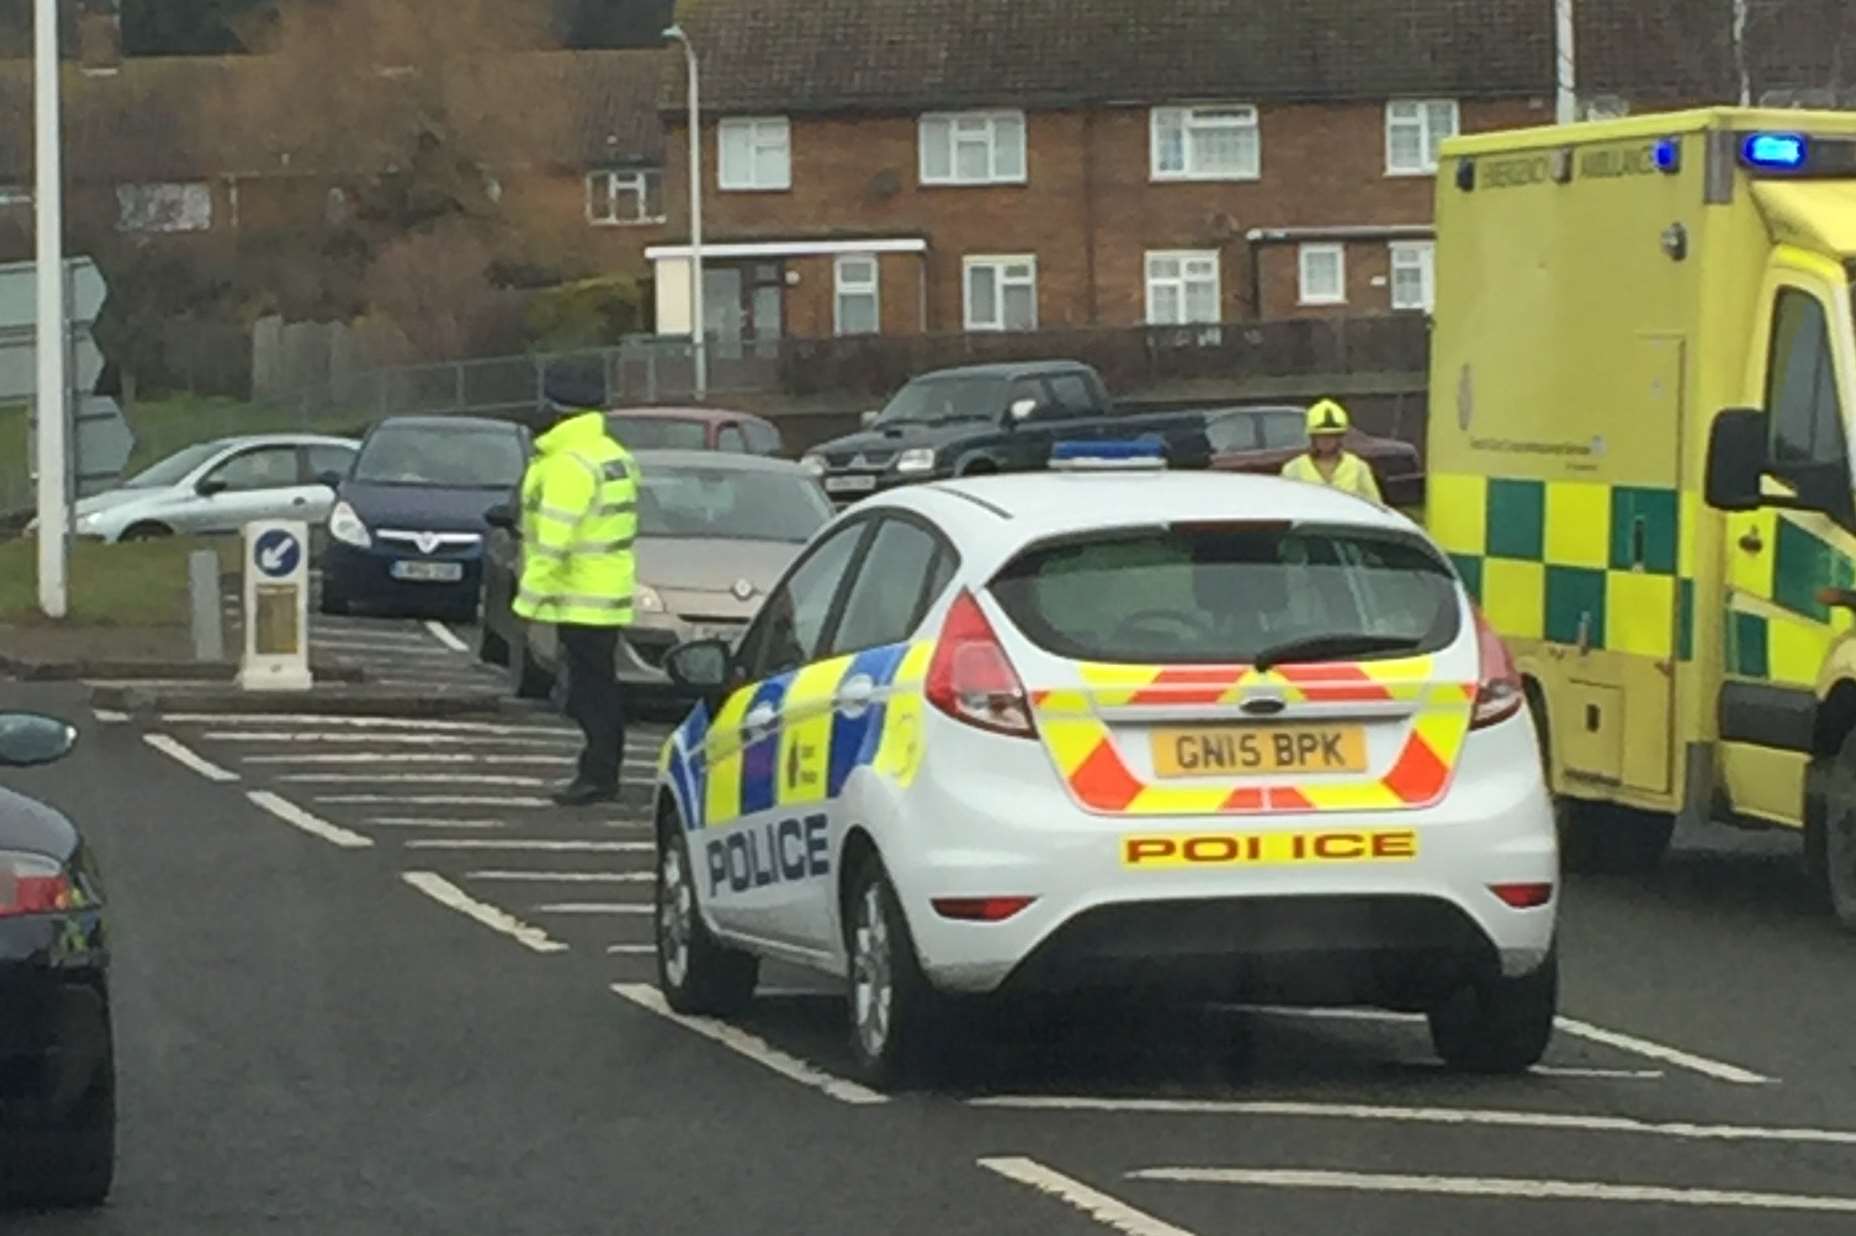 Police, firefighters and paramedics have been sent to the scene in Black Bull Road, Folkestone